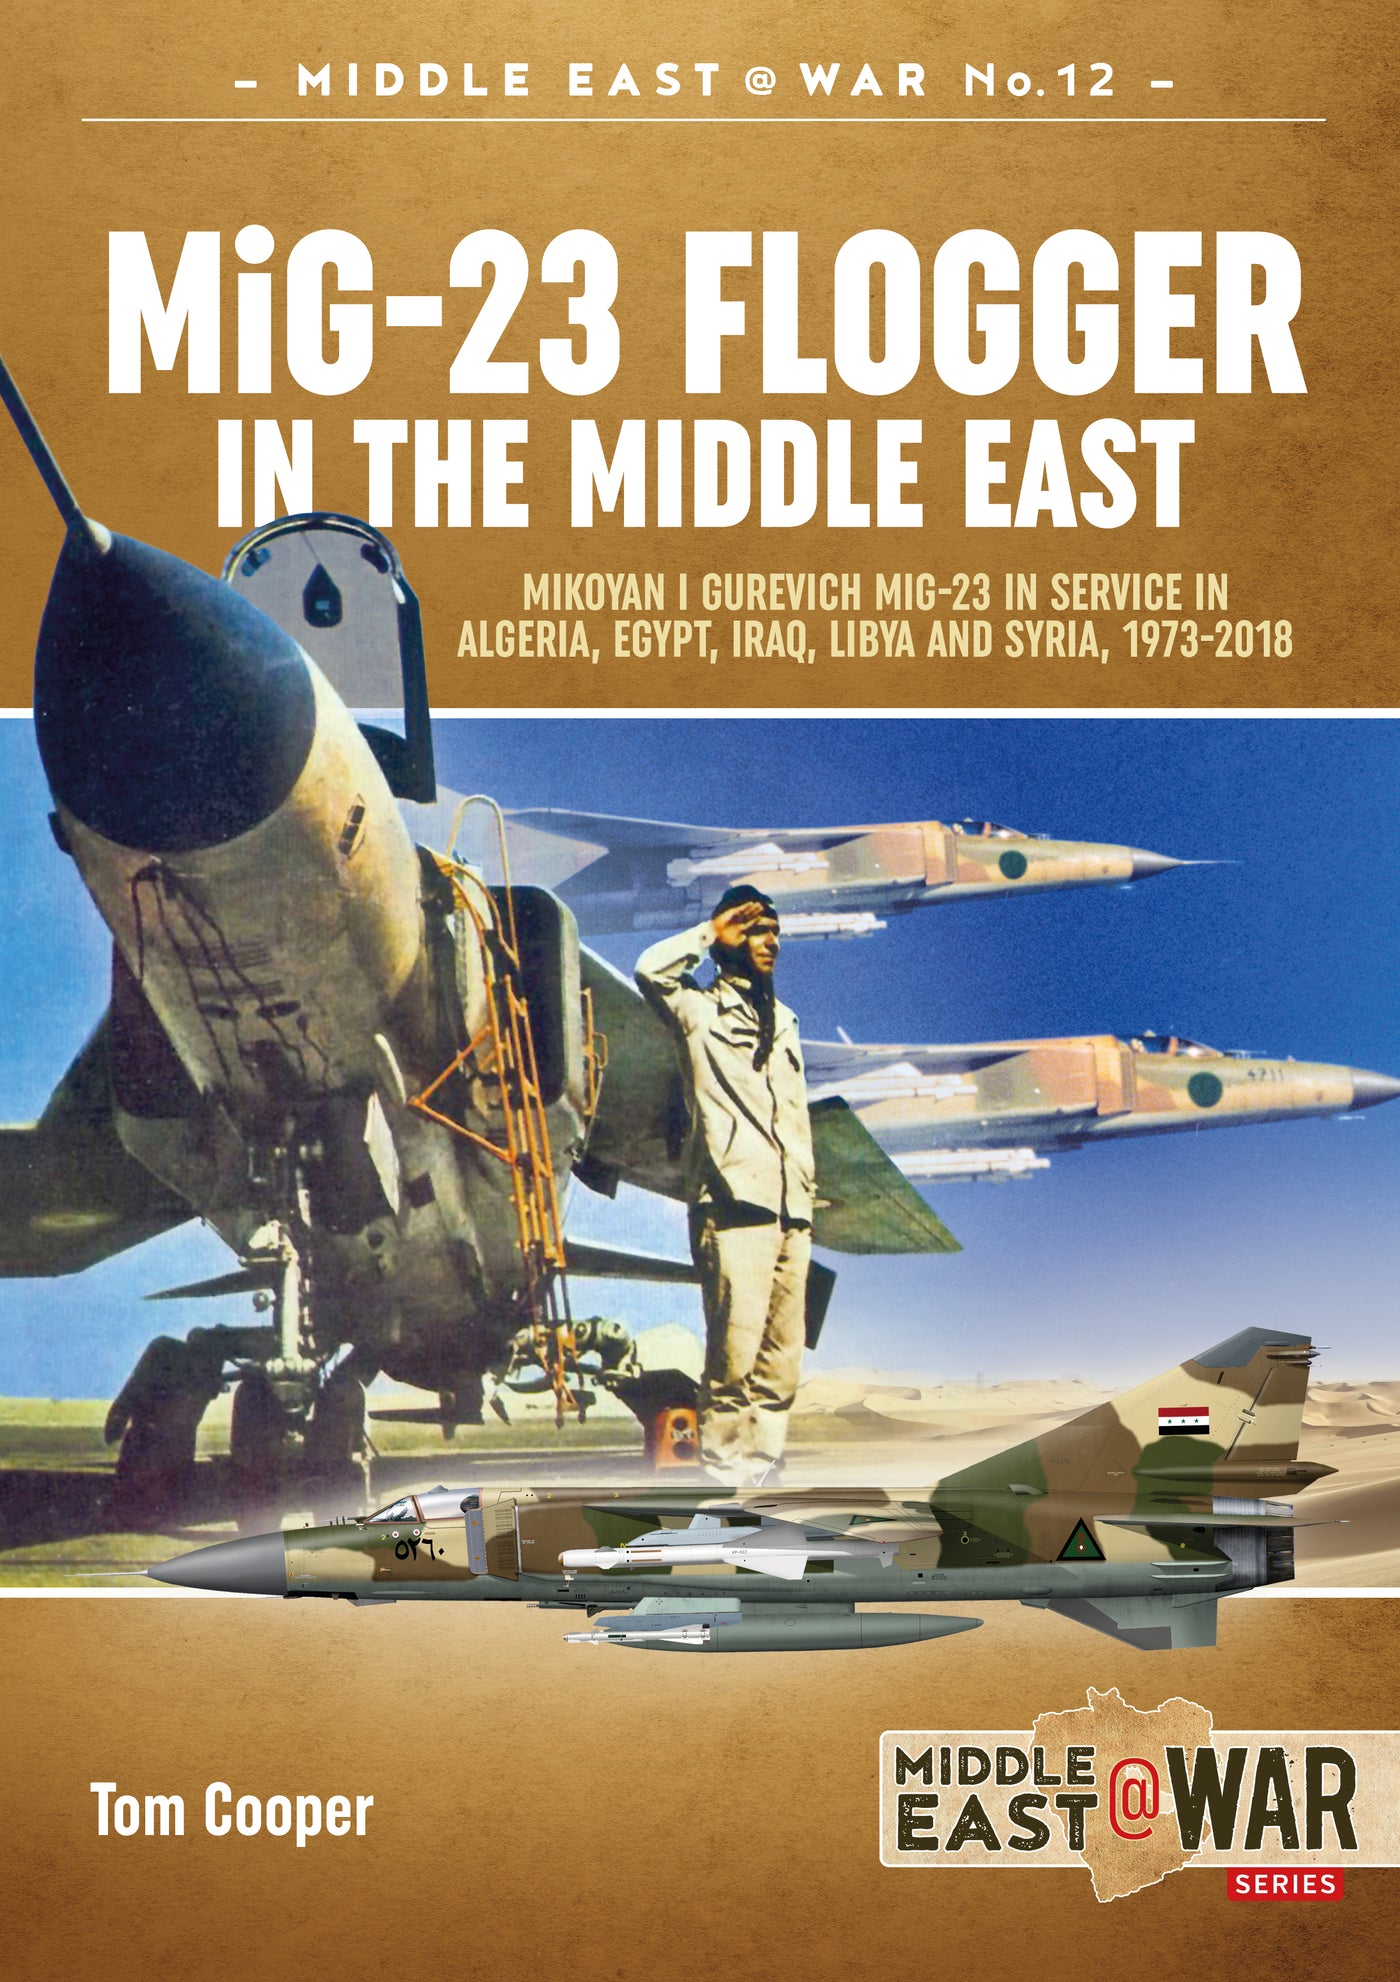 MiG-23 Flogger in the Middle East